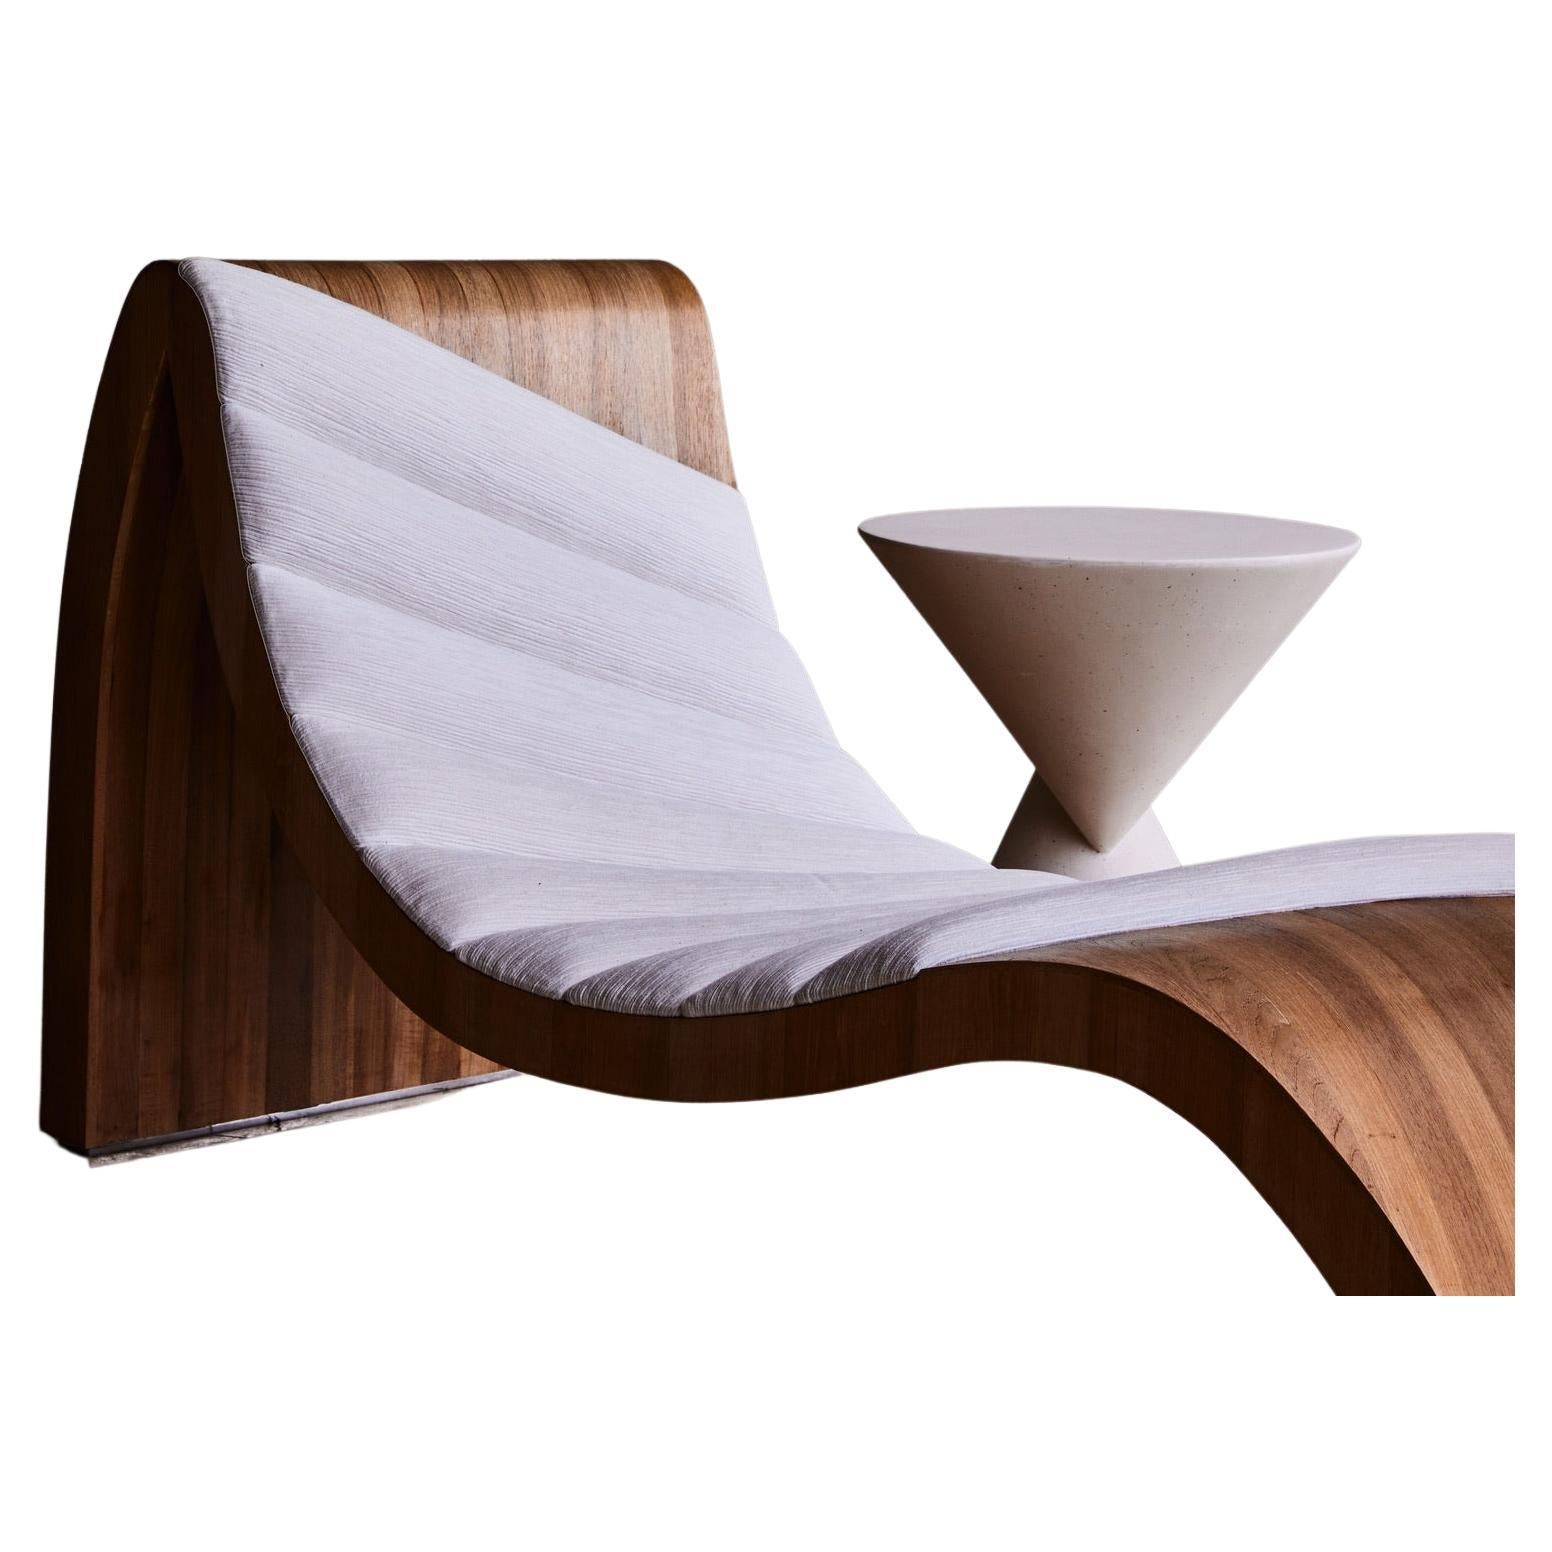 Permanent Reverie Chaise Lounge im Angebot